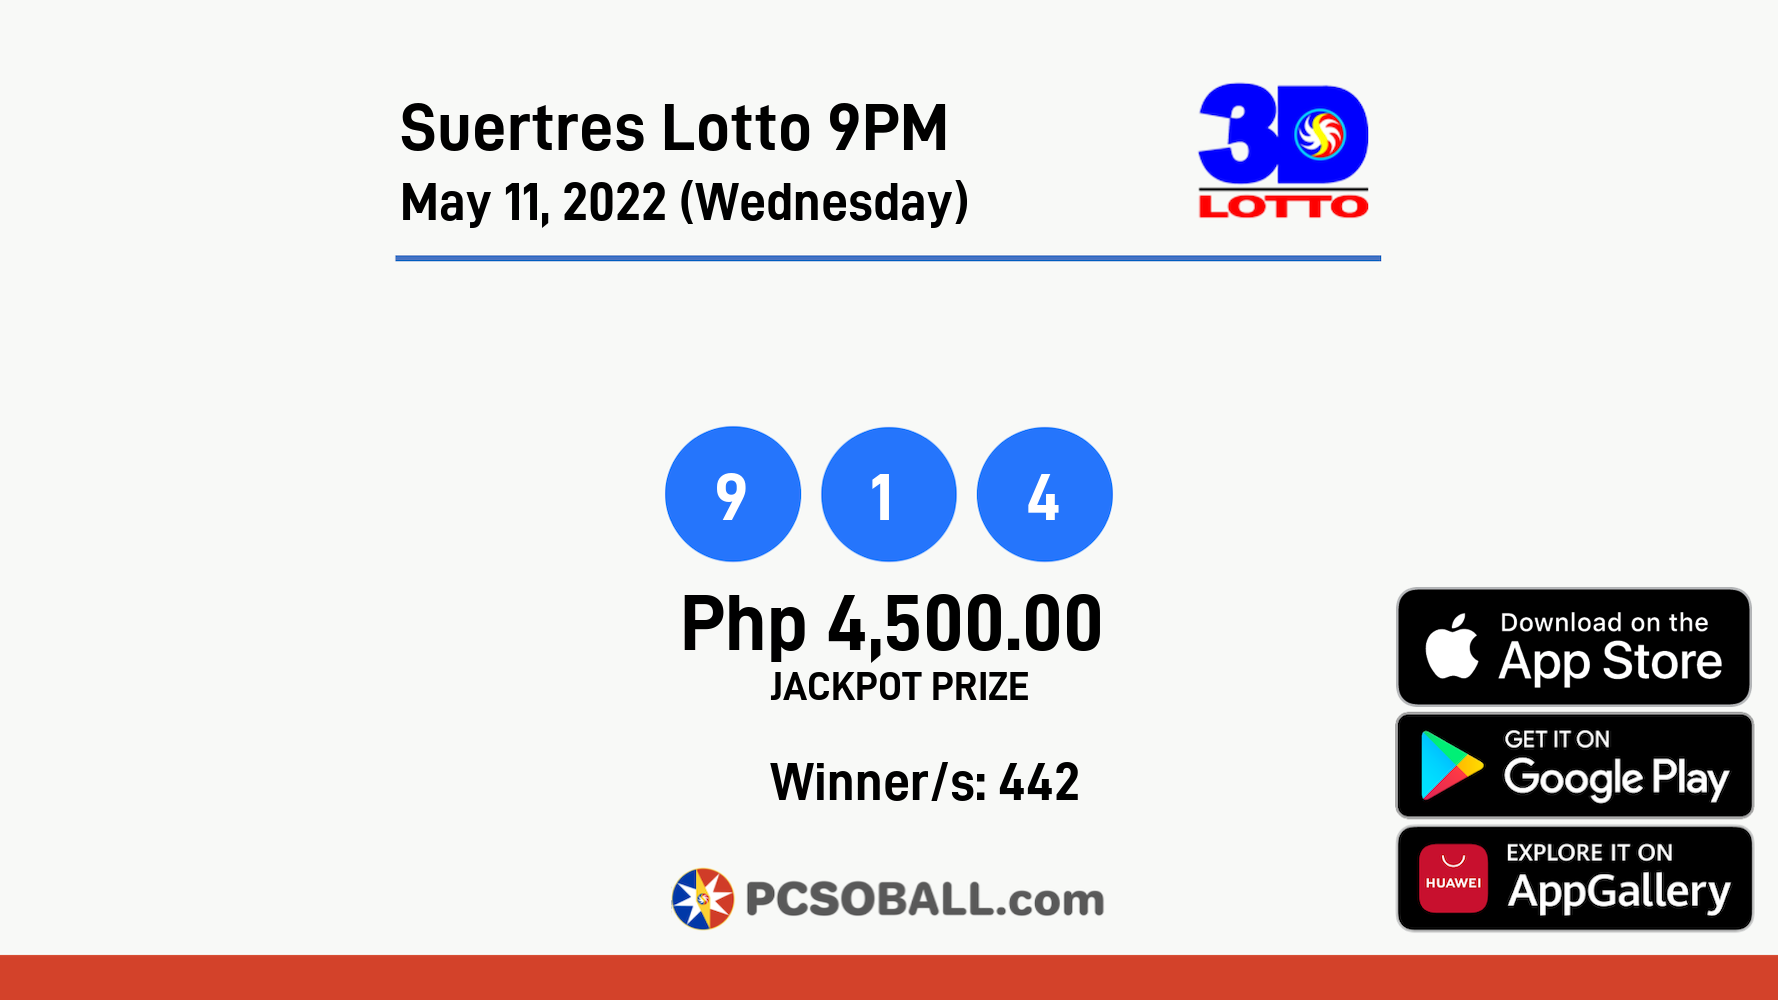 Suertres Lotto 9PM May 11, 2022 (Wednesday) Result